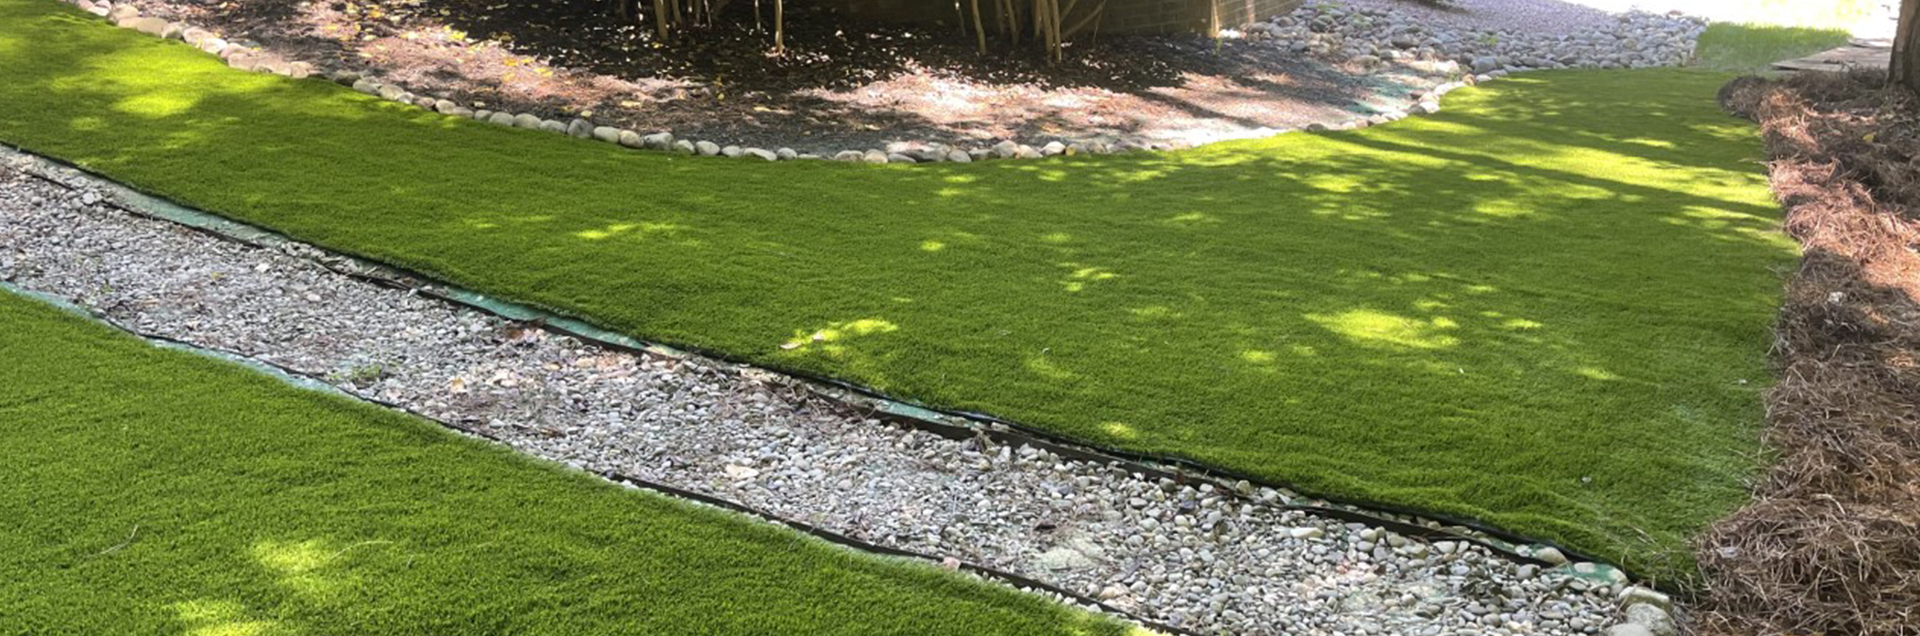 Landscaping/Lawn Care